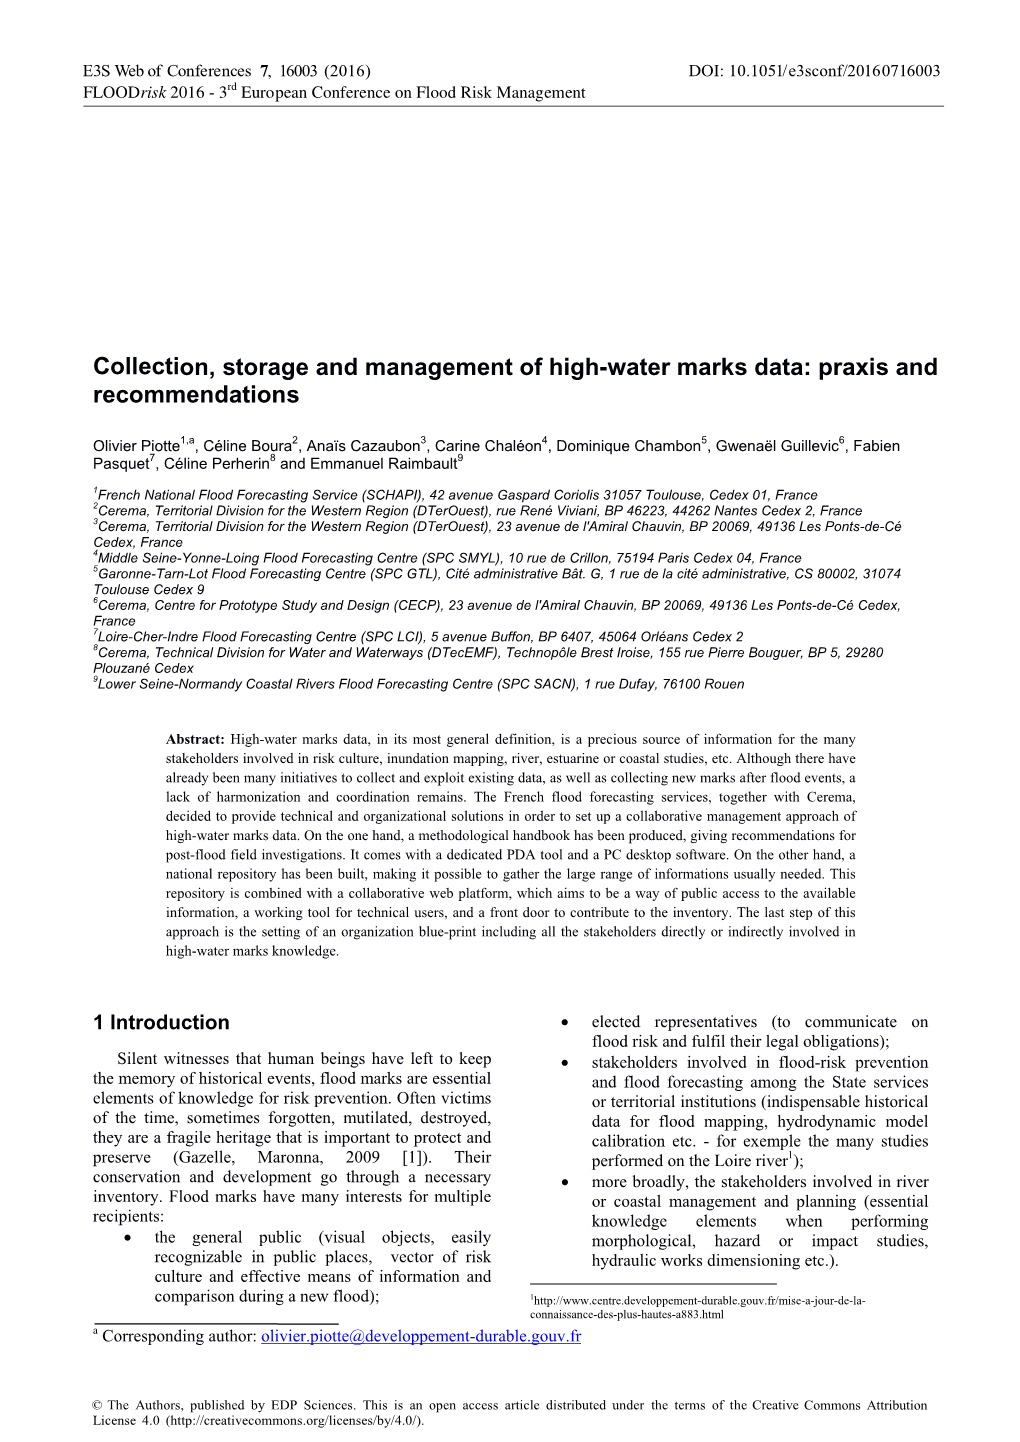 Collection, Storage and Management of High-Water Marks Data: Praxis and Recommendations